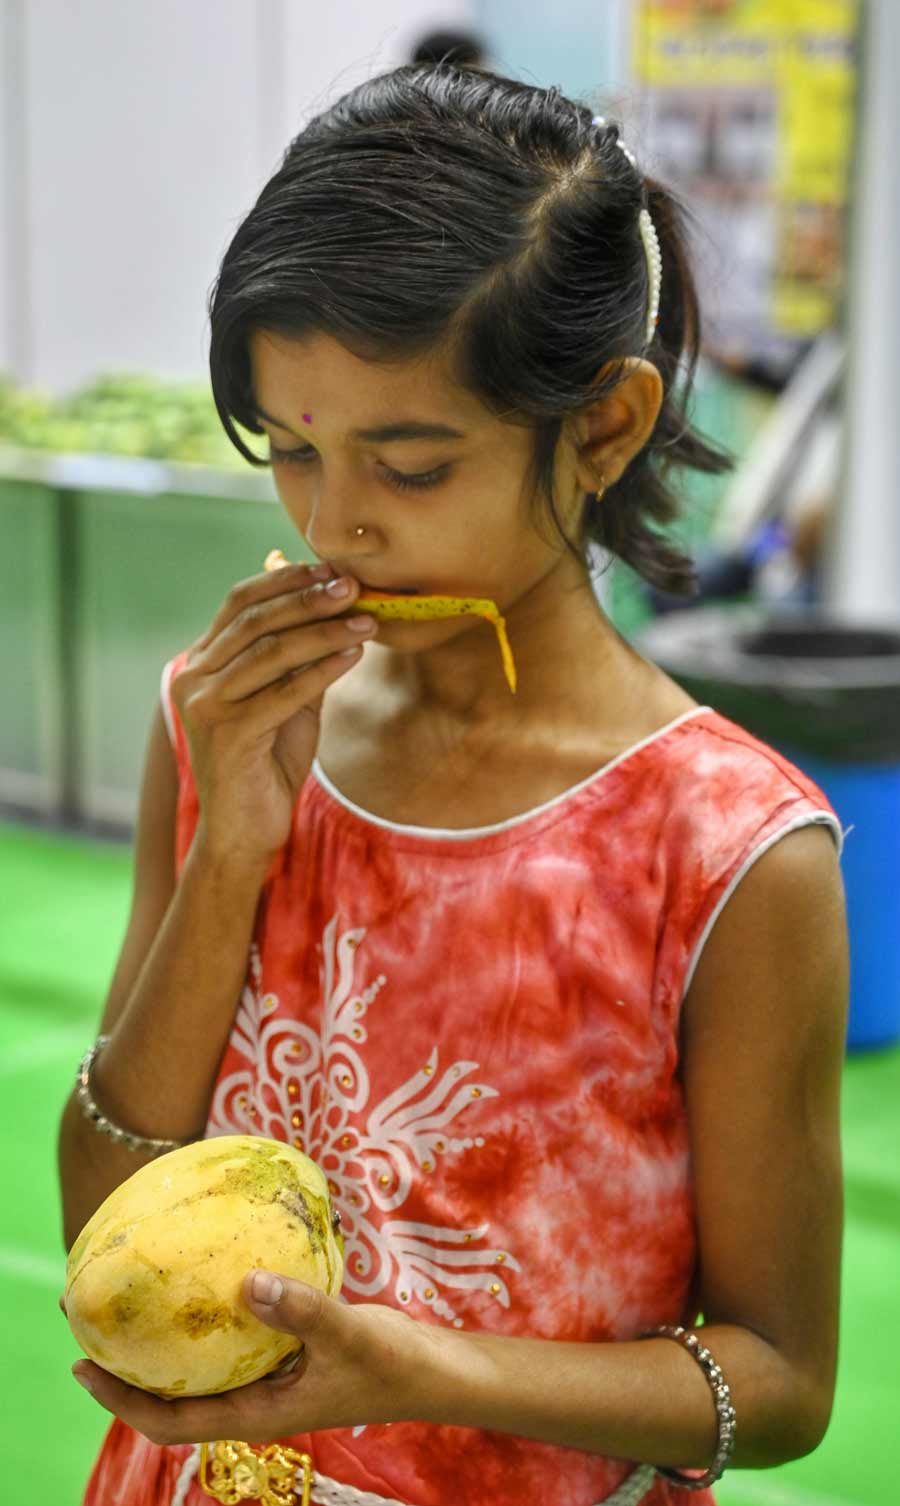 A girl peels a mango and tastes it at the festival.